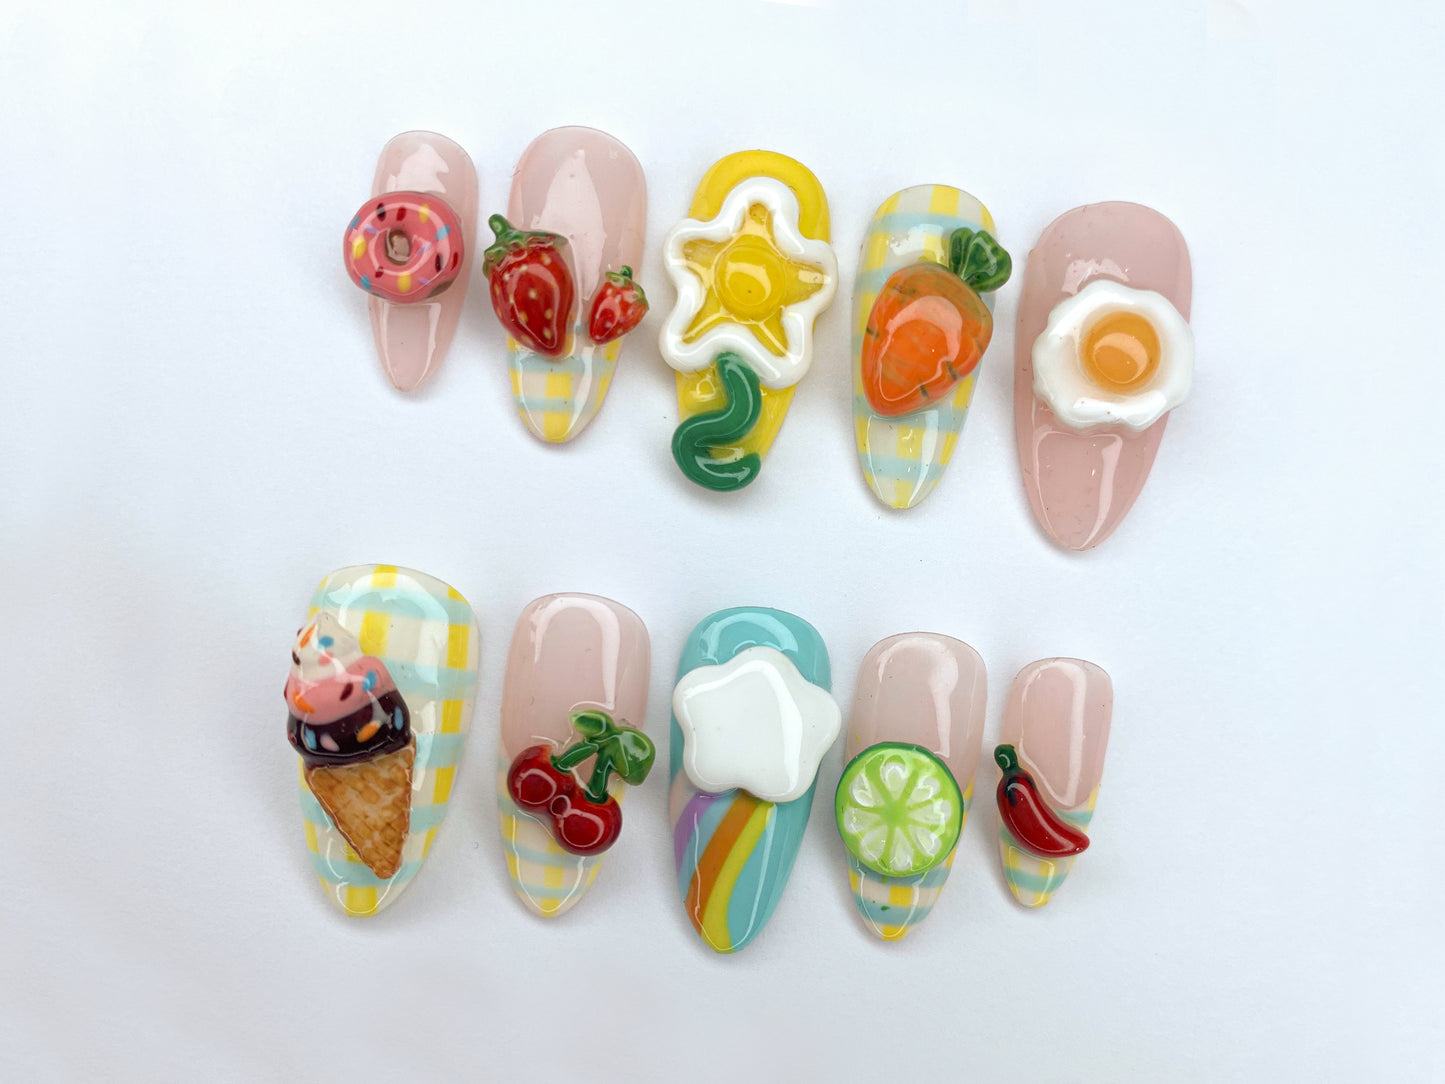 Fun and Whimsical 3D Nail Art Set | Food and Fruit Designs with Eggs, Carrots, Ice Cream, and More | Handmade Press On Nails | J299